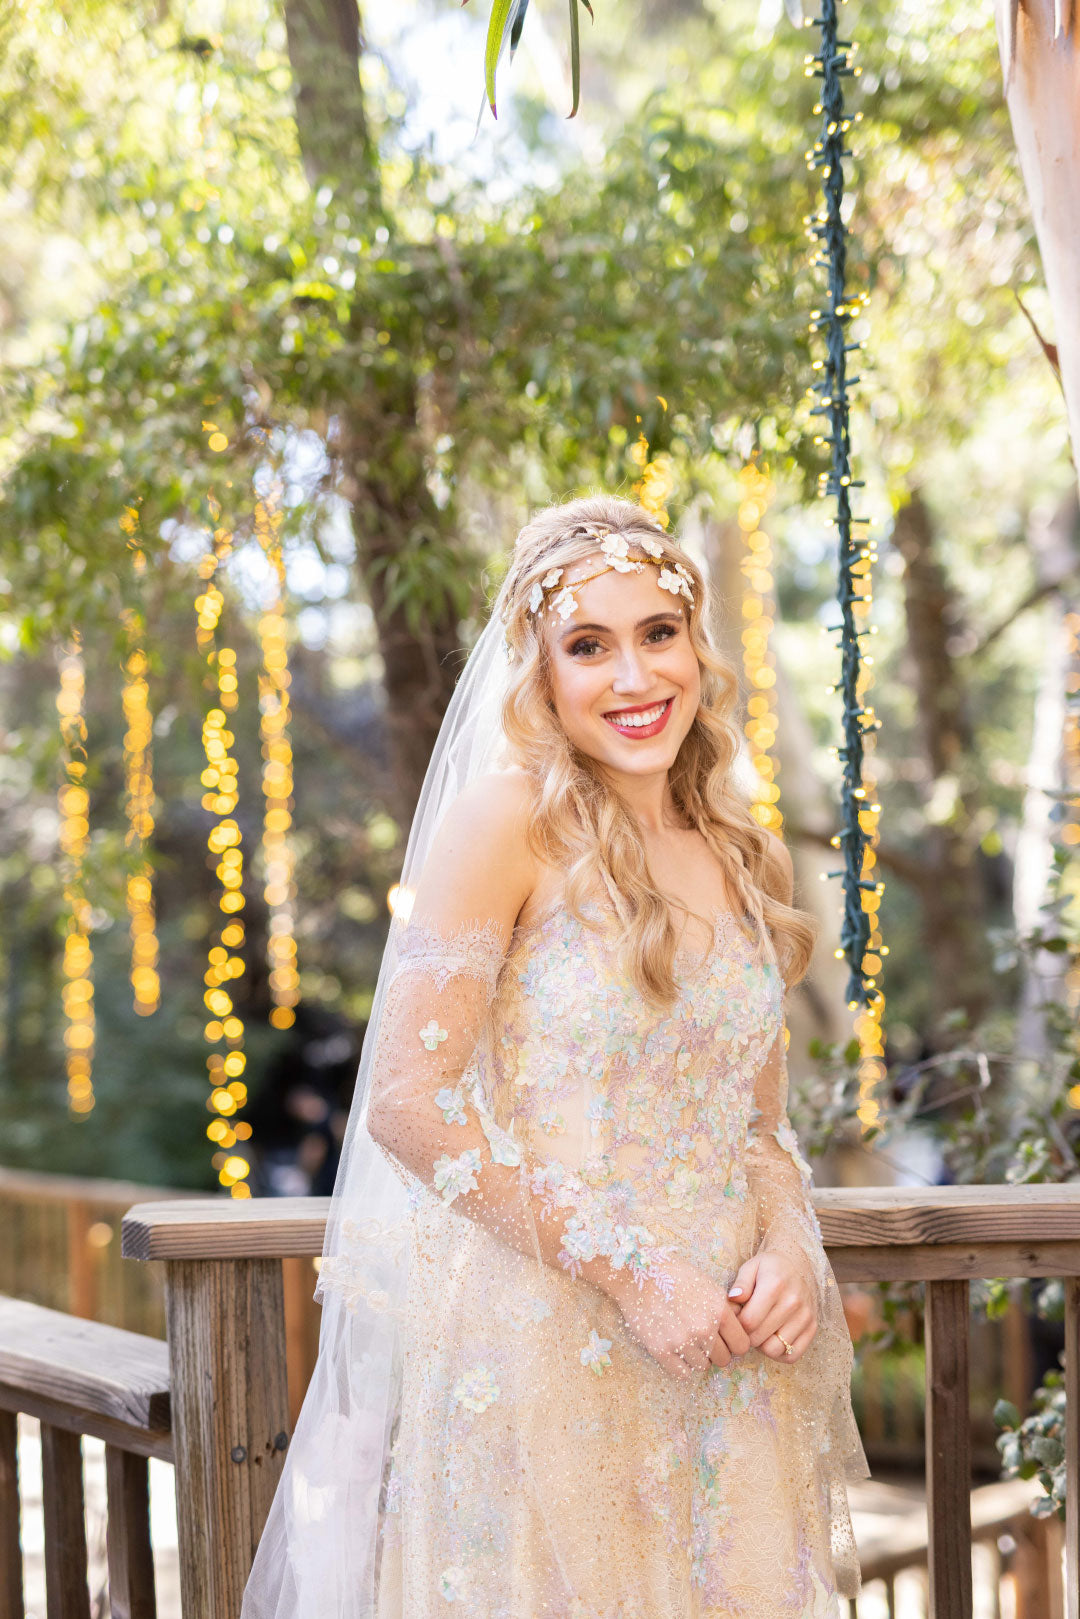 Bride Wearing Ophelia Couture Wedding Dress with Color Designed by Claire Pettibone